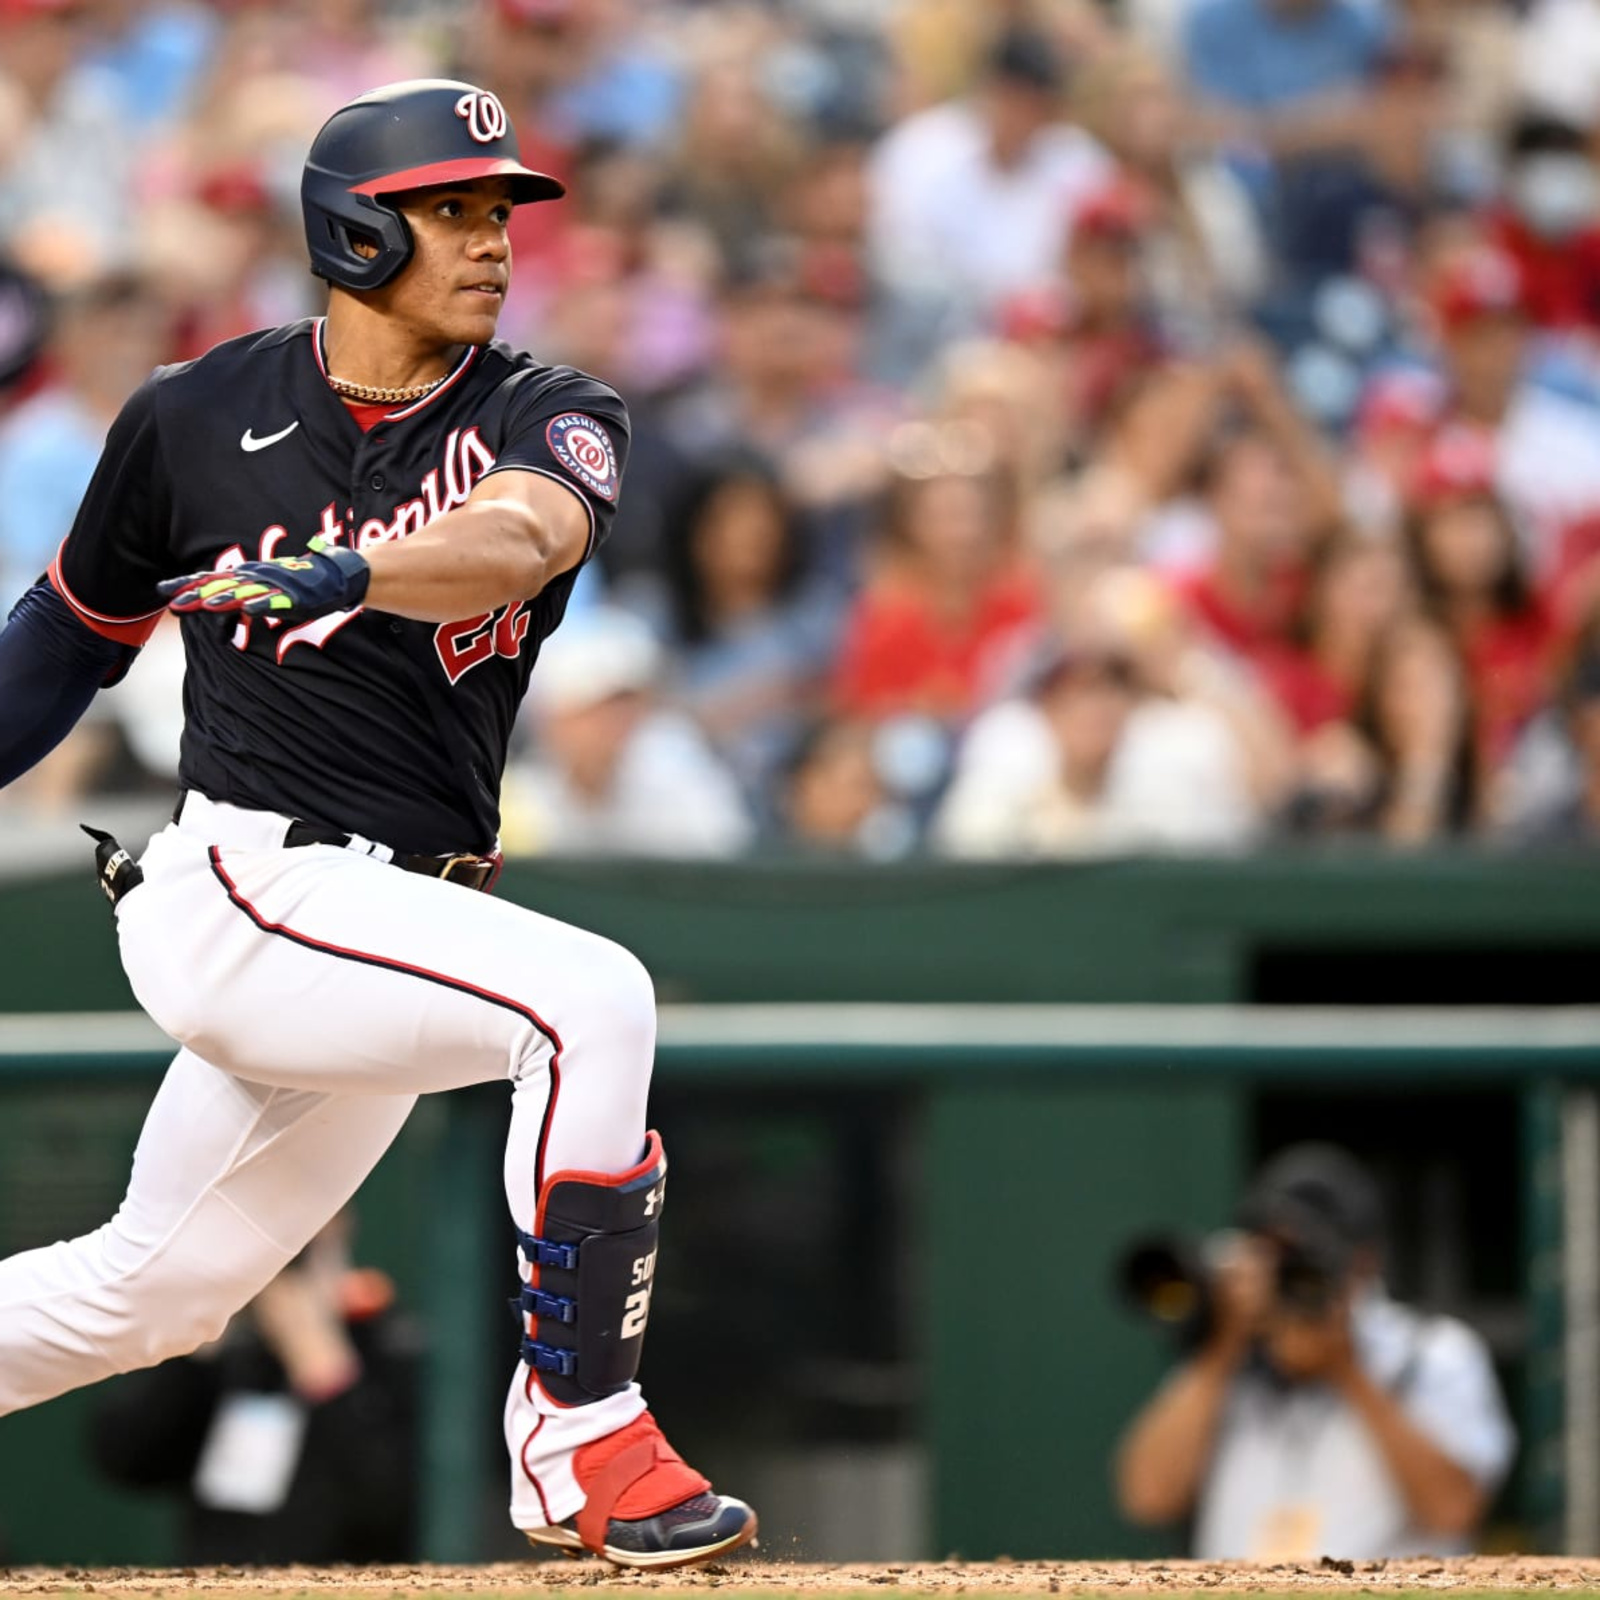 Switch O'Neill with Carlson and you have a deal” “Nowhere near enough” -  MLB fans debate hypothetical Juan Soto trade to St. Louis Cardinals